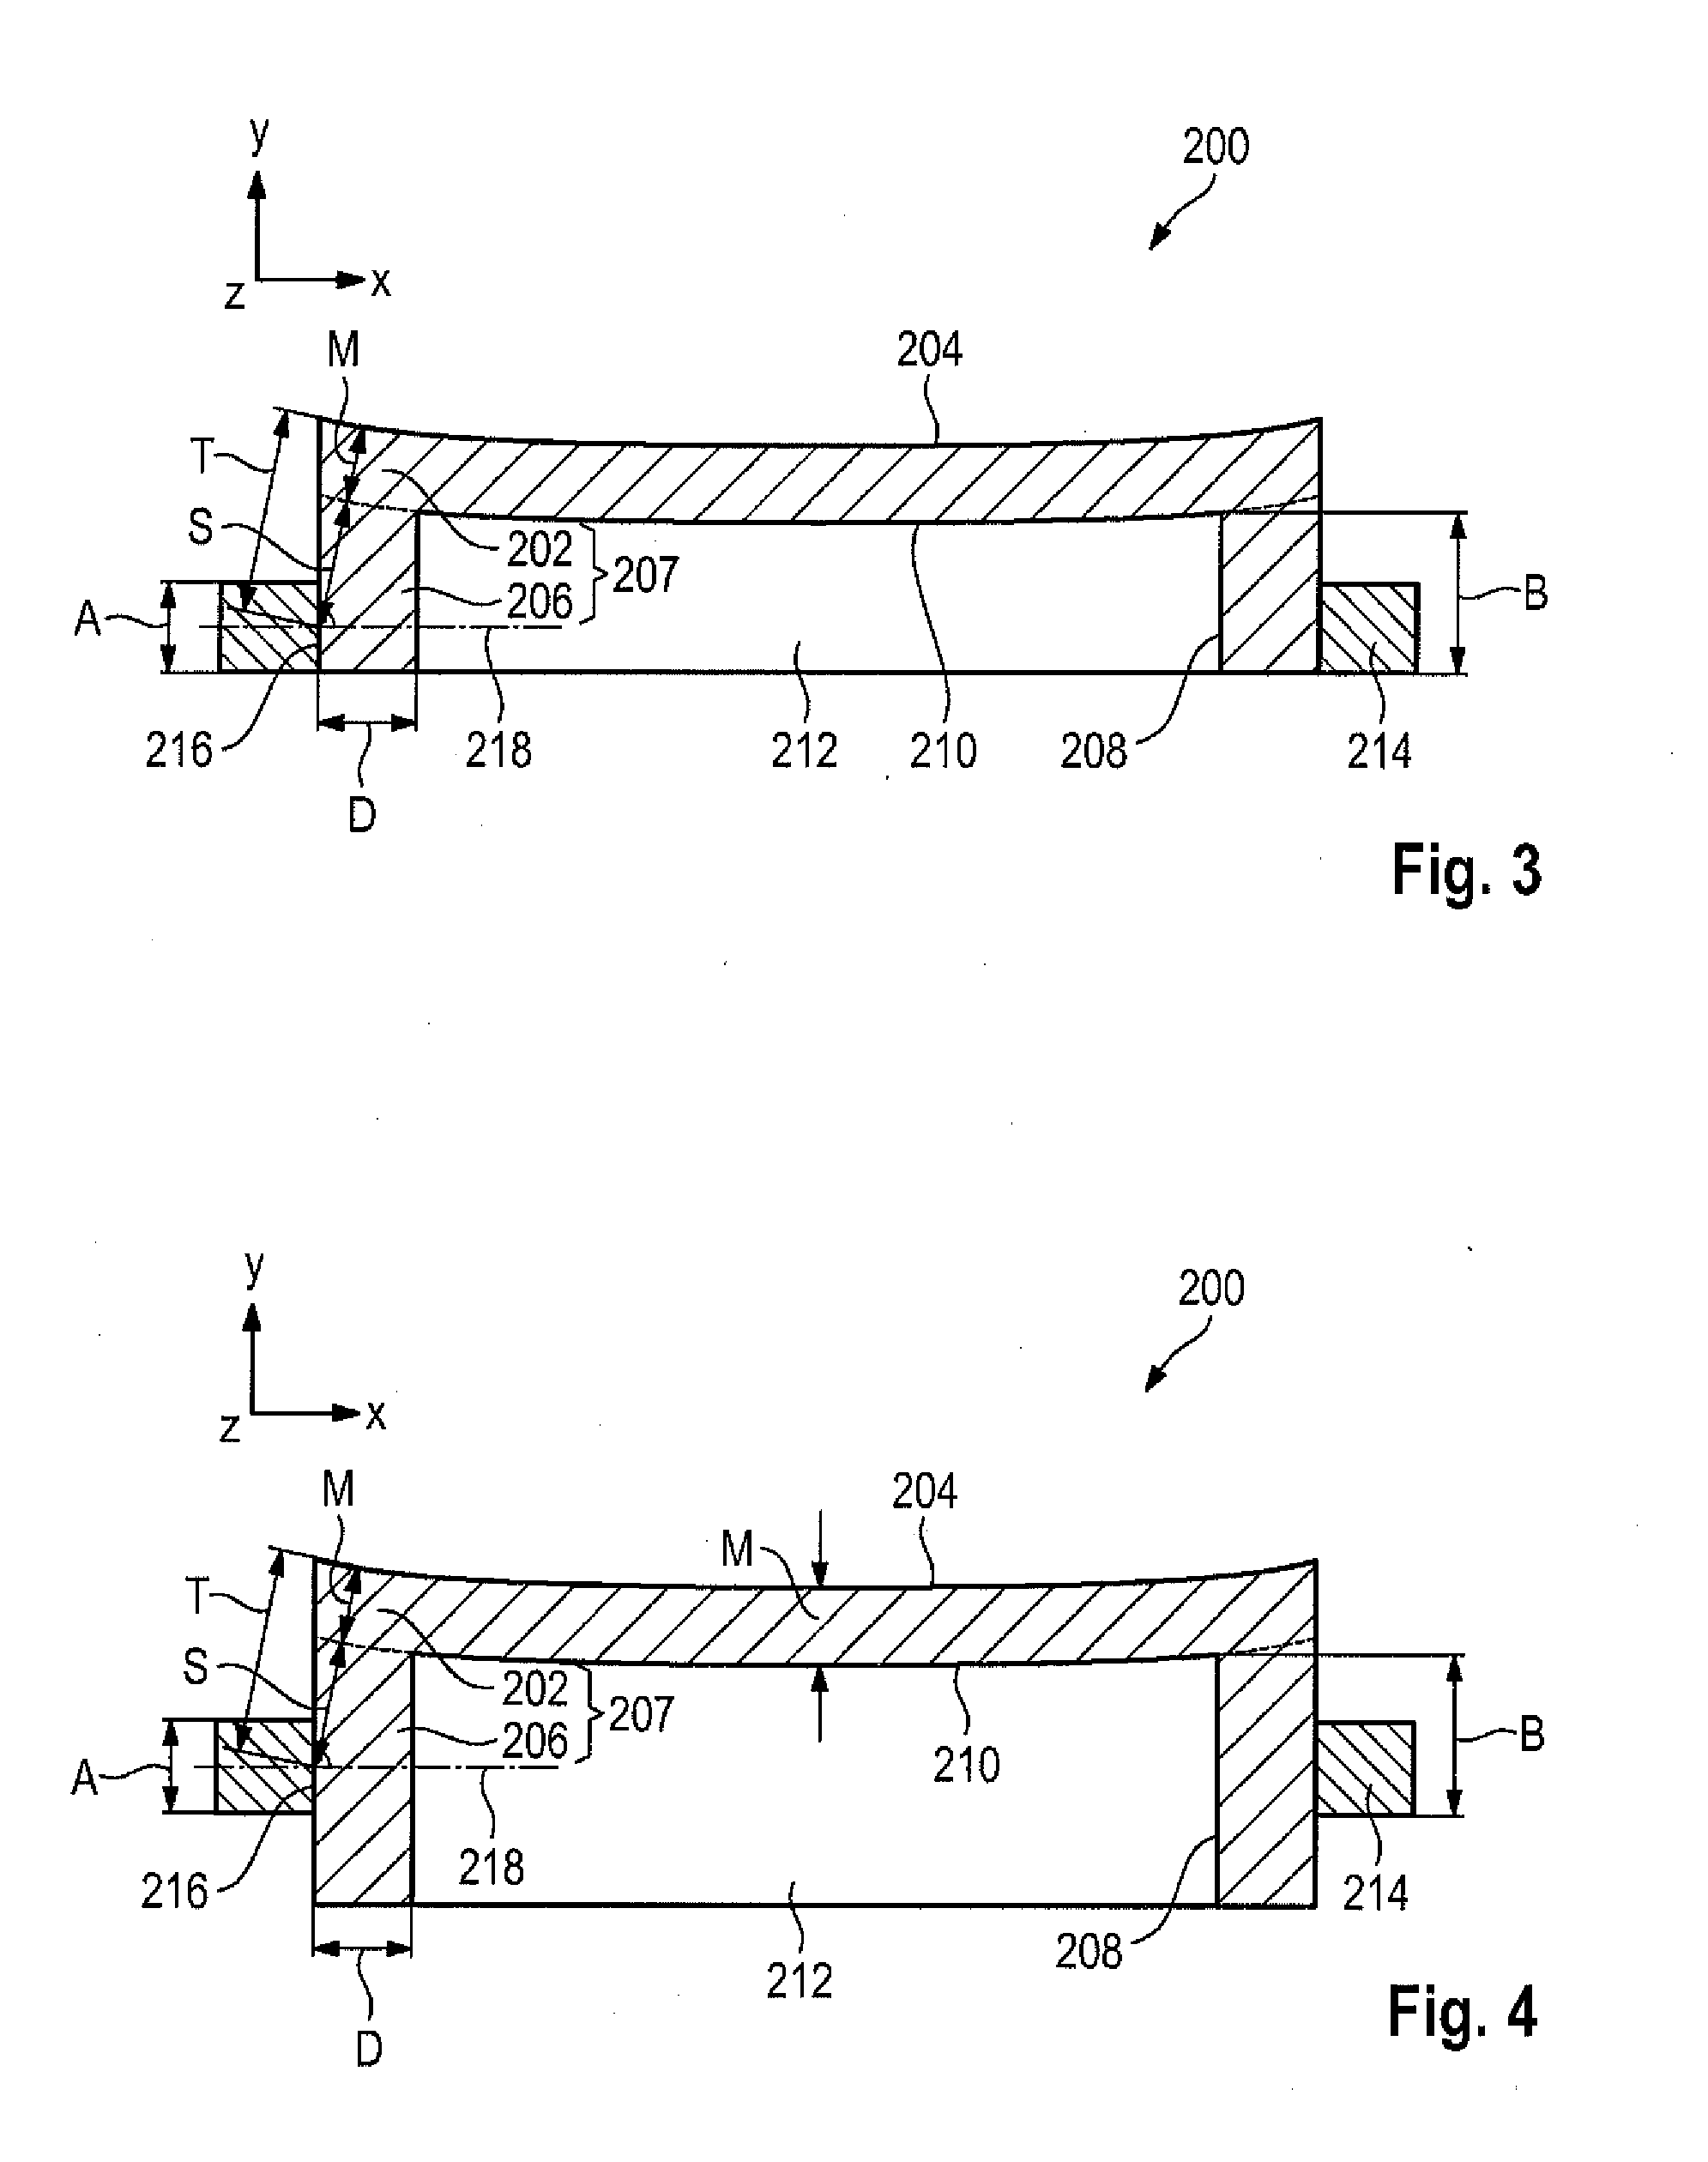 Lithography apparatus and method for producing a mirror arrangement